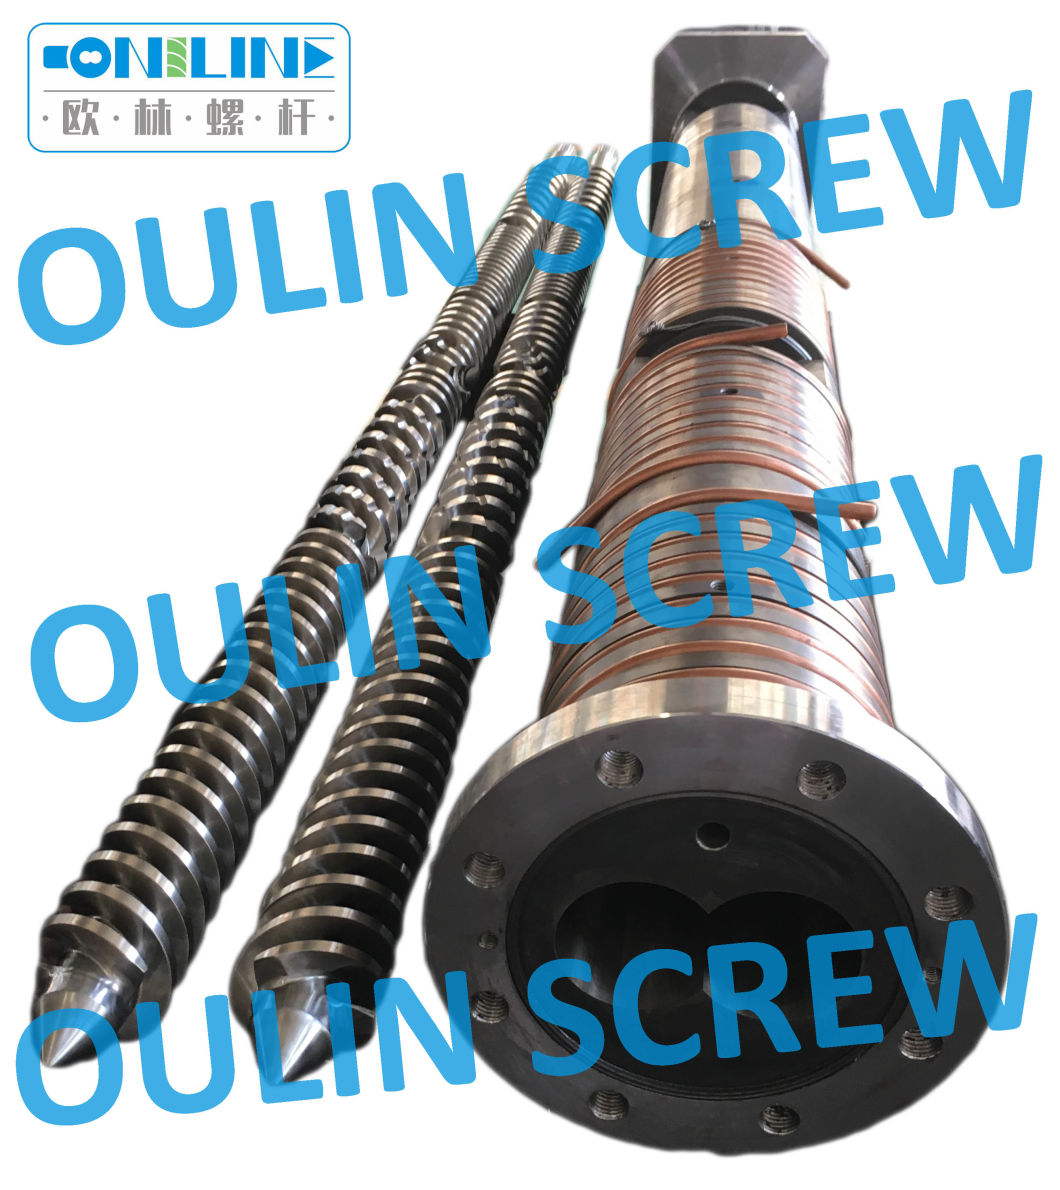 Parallel Screw and Barrel